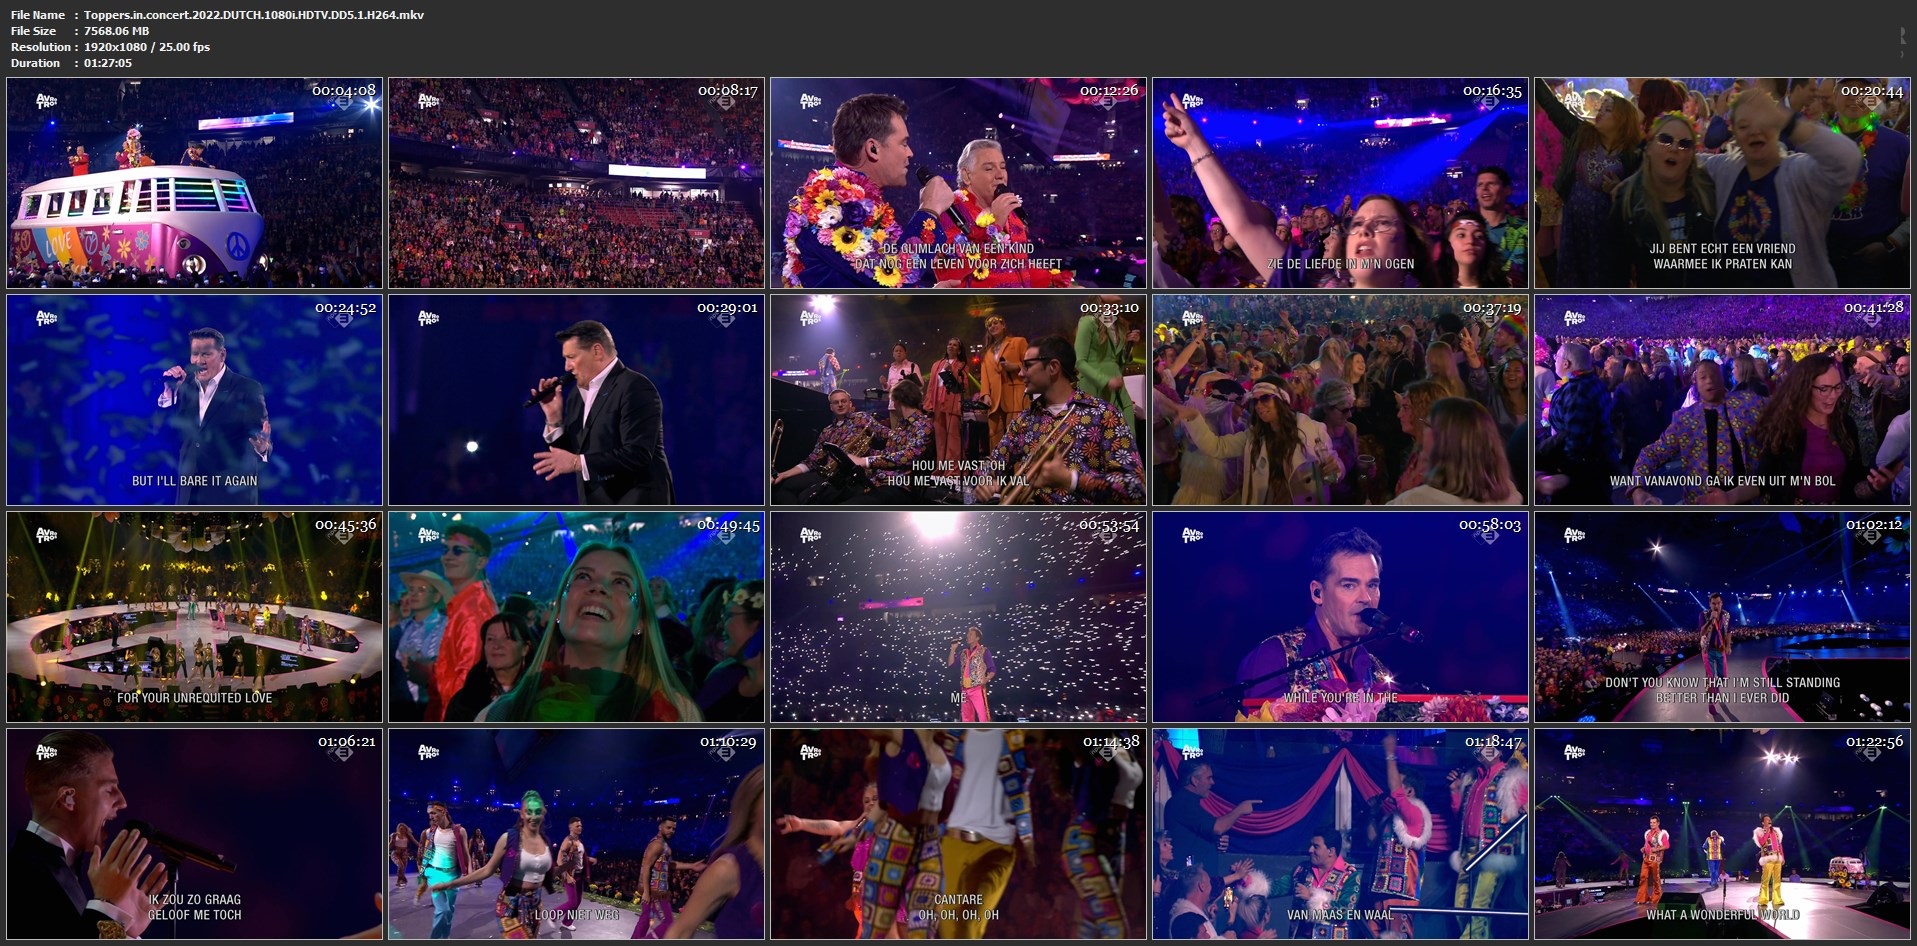 Toppers in concert 2022 DUTCH 1080i HDTV